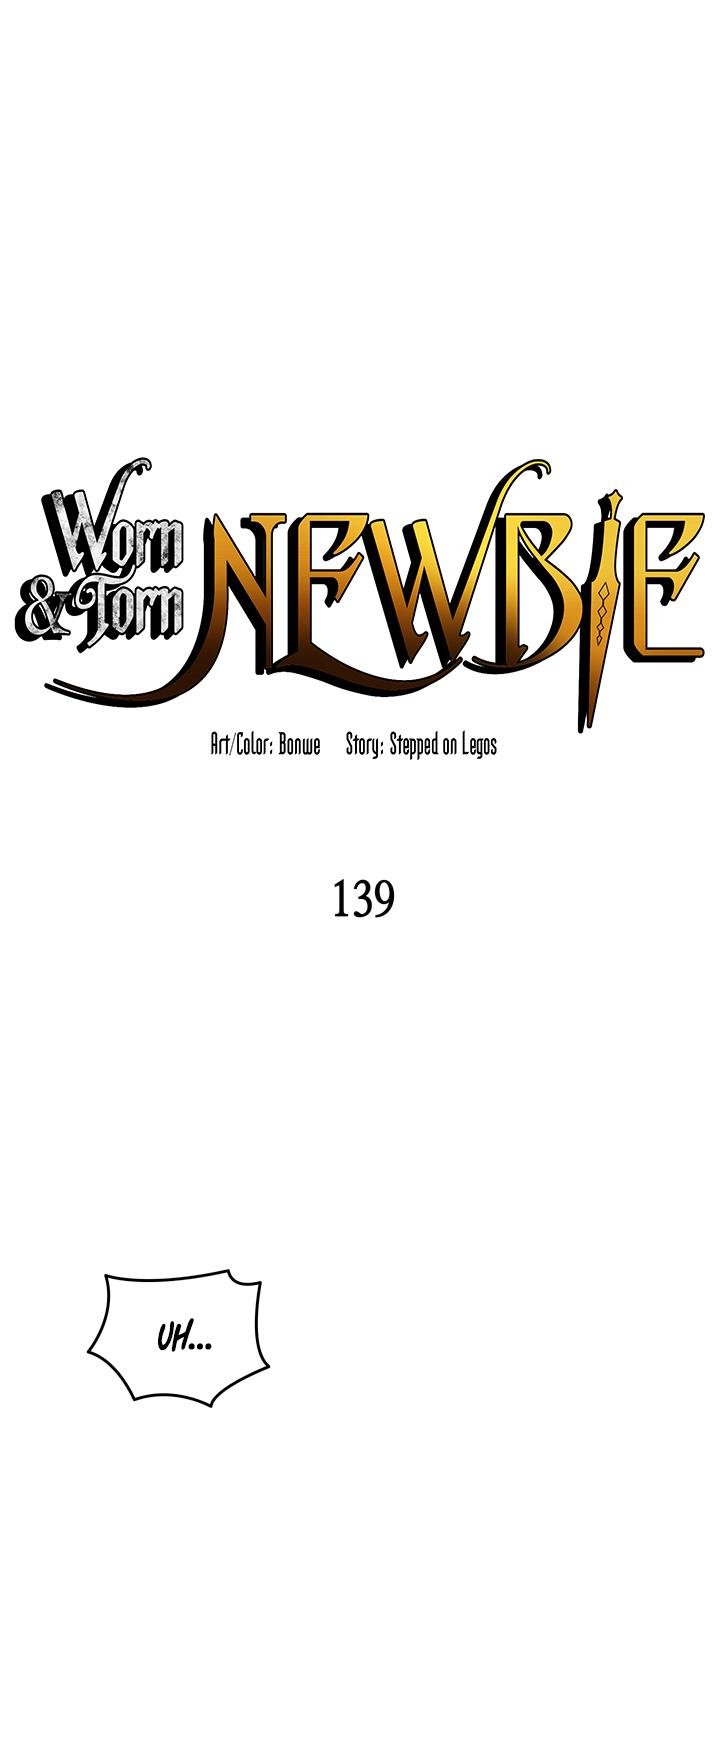 worn-and-torn-newbie-chap-139-8